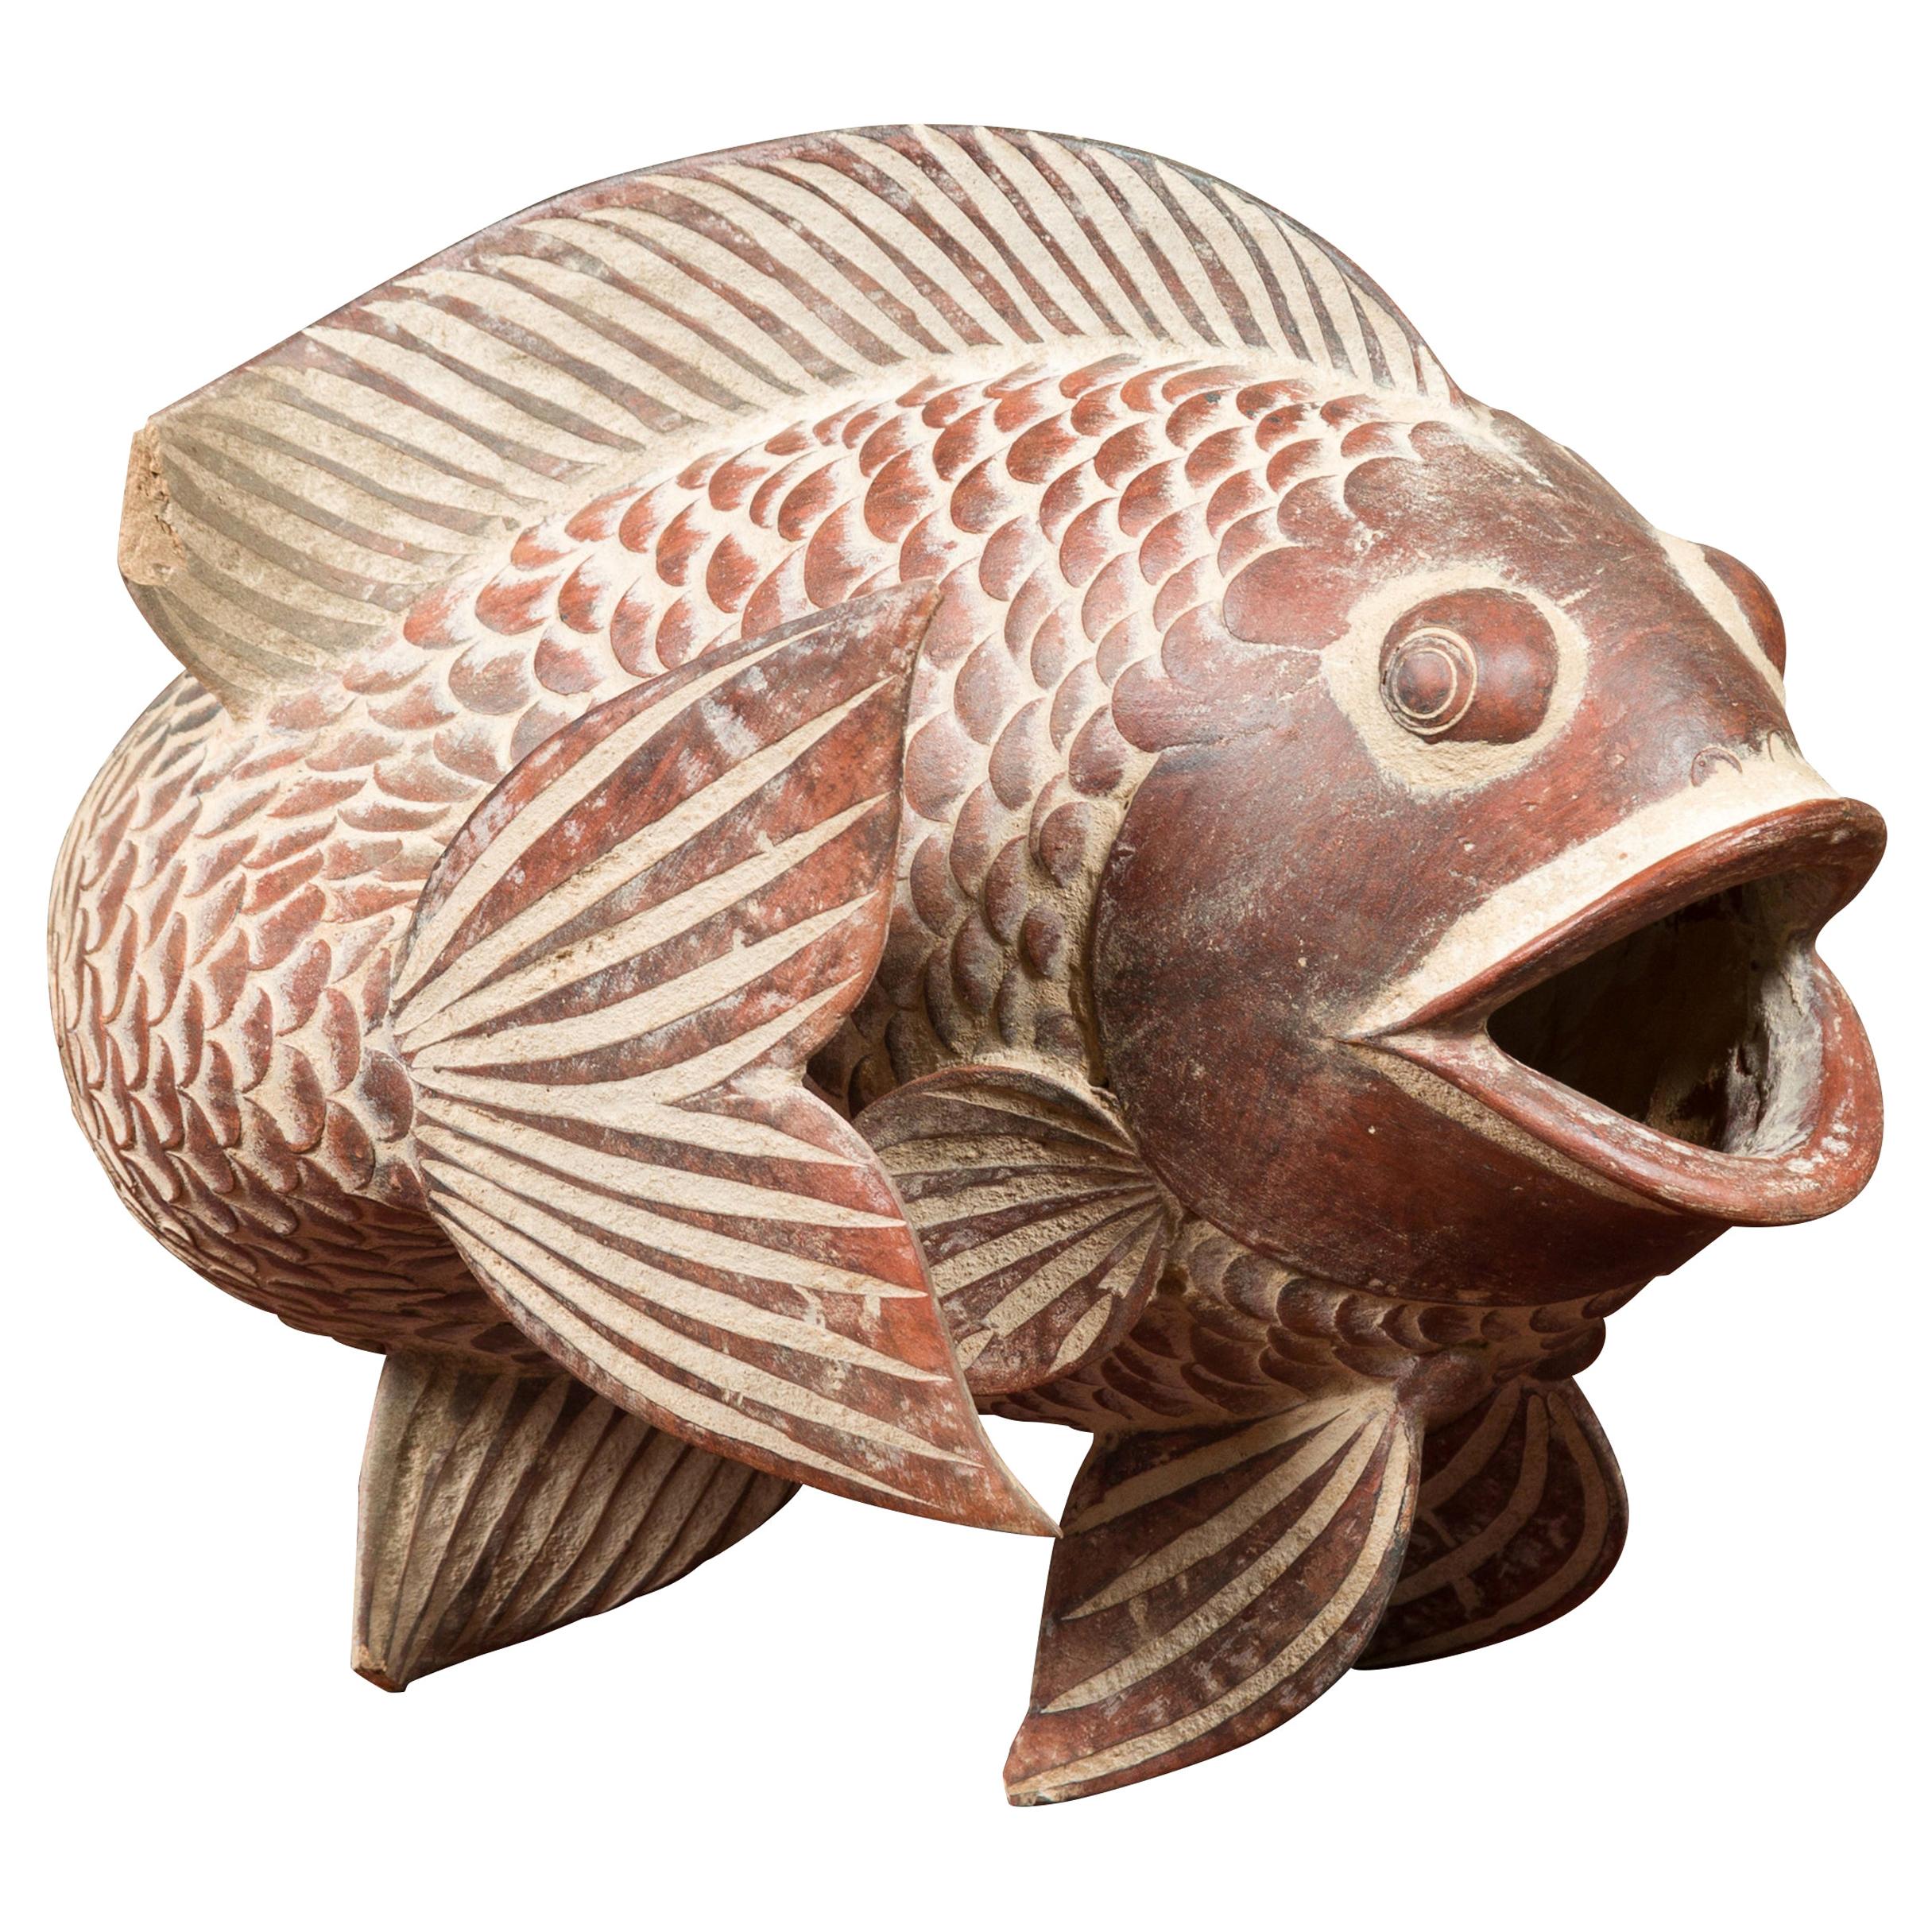 Contemporary Thai Terracotta Fish Sculpture with Brown Accents and Curving Fin